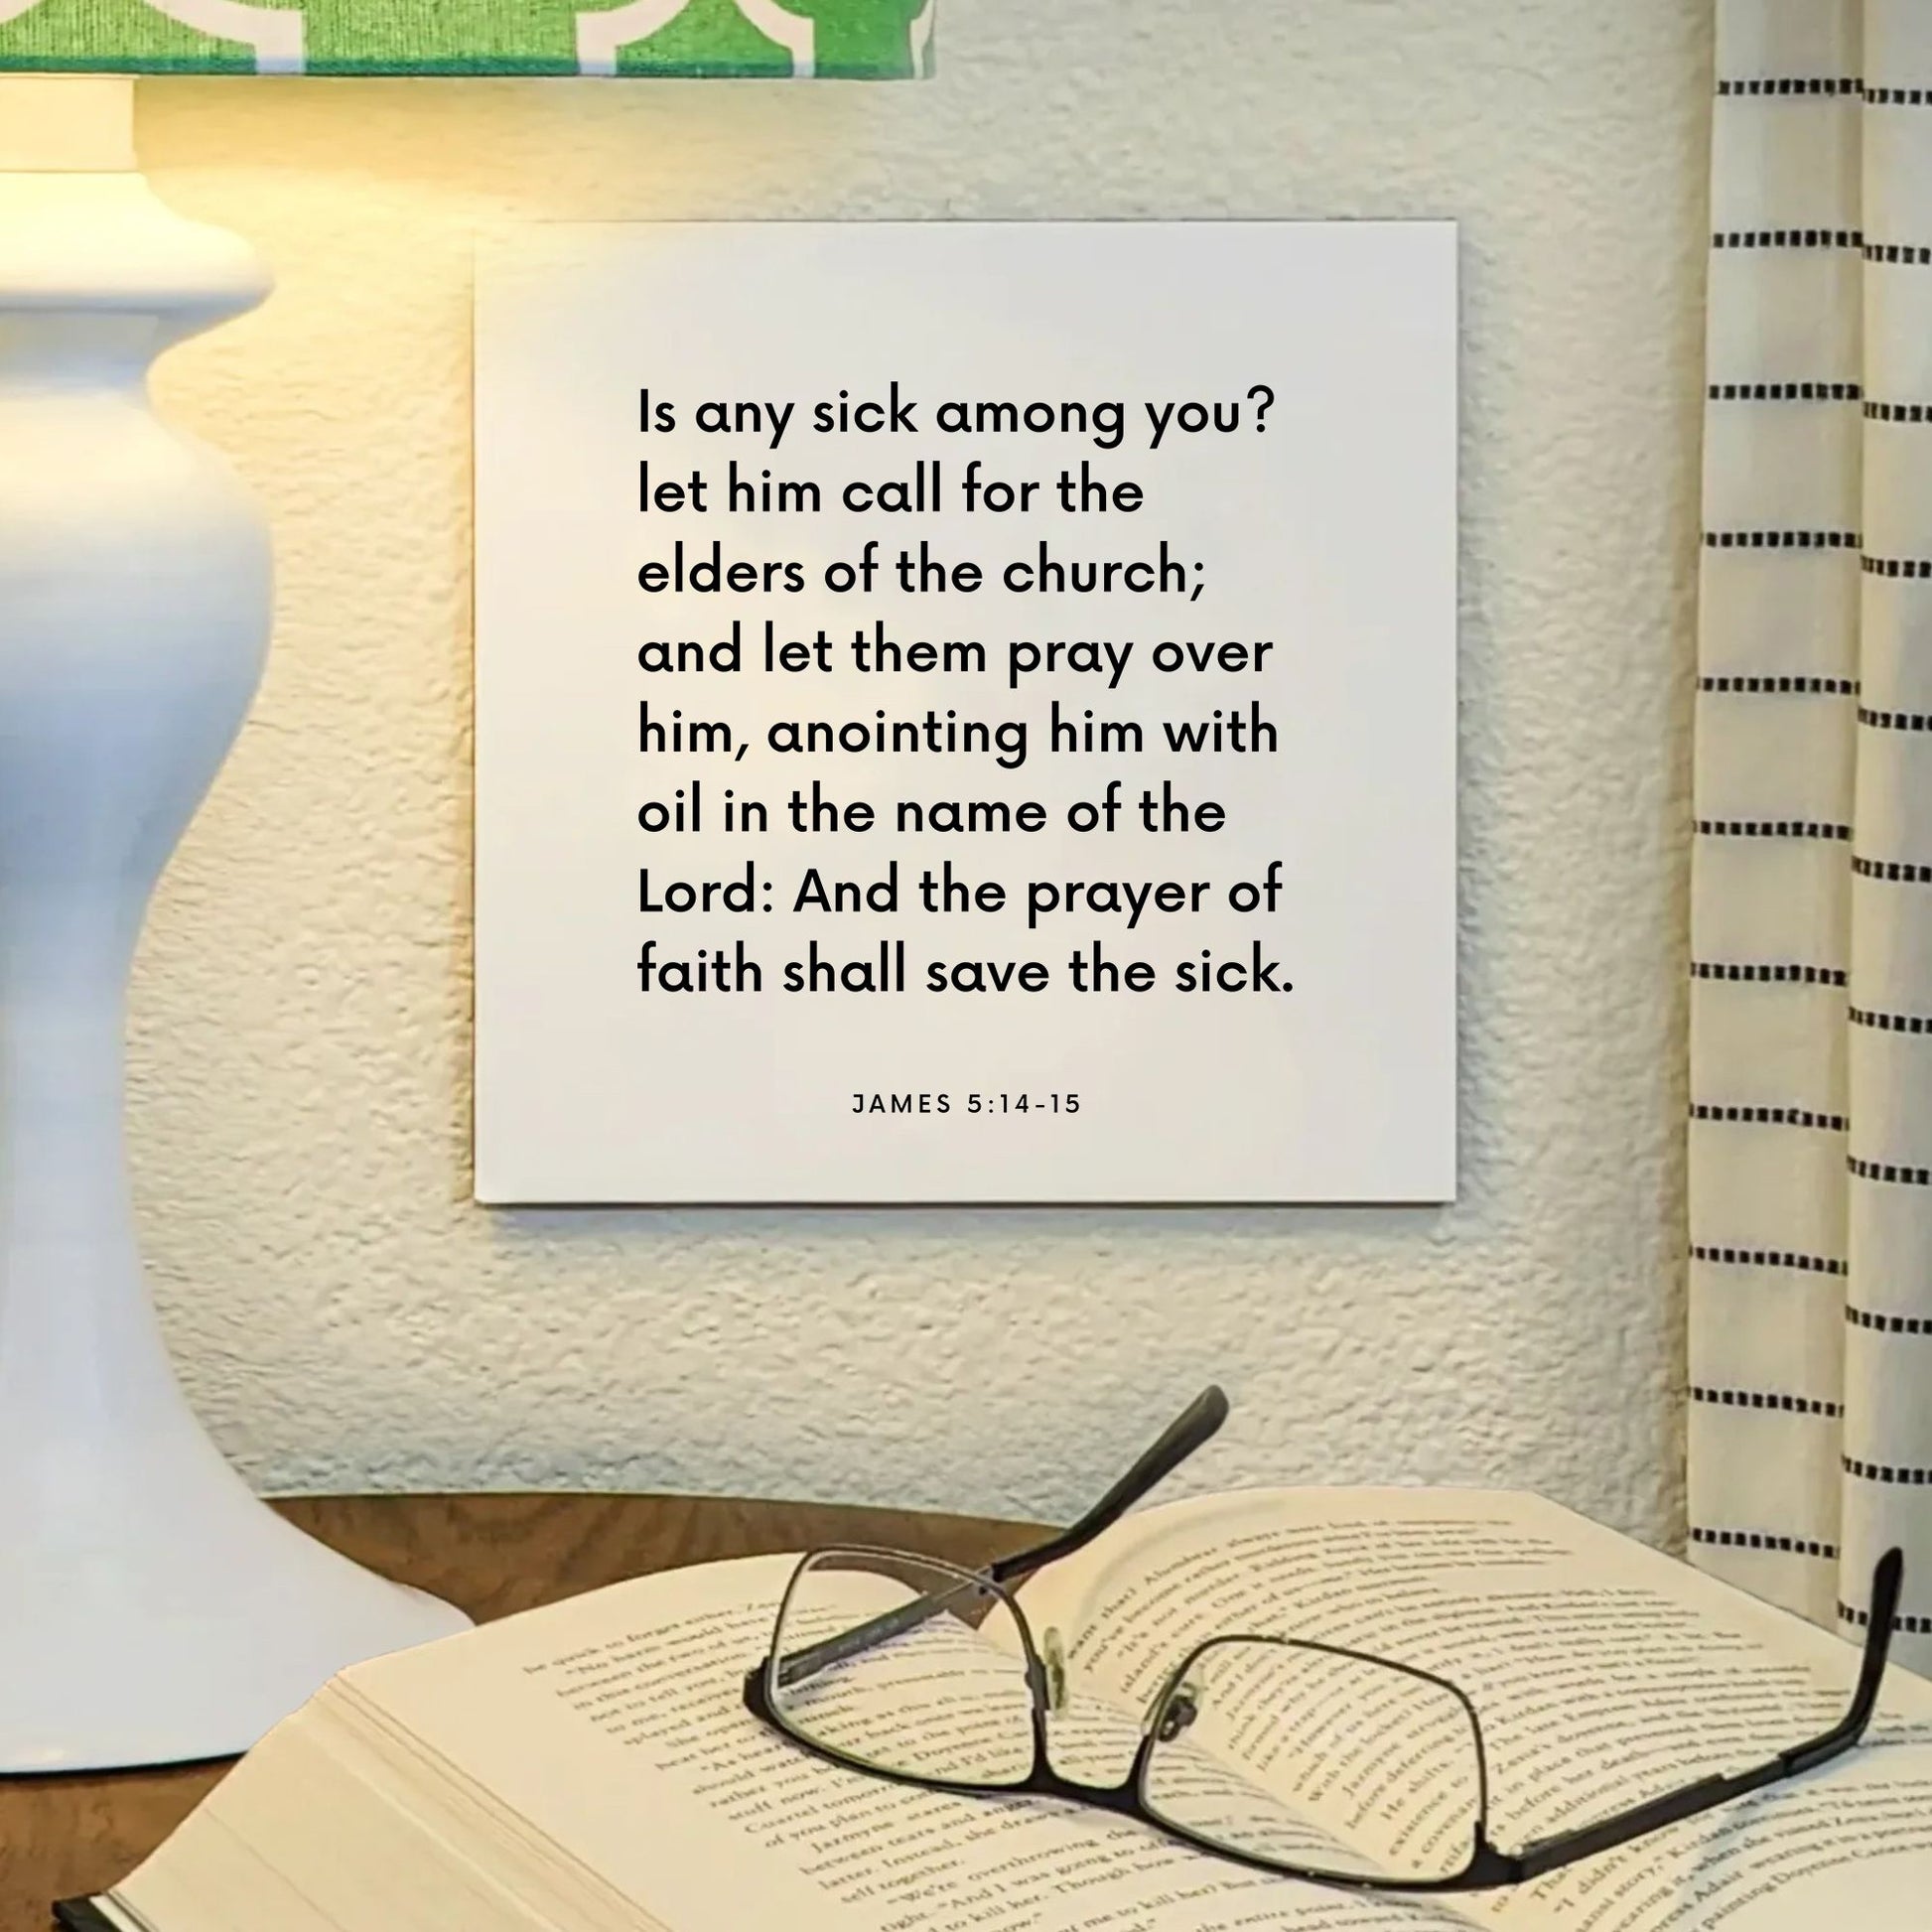 Lamp mouting of the scripture tile for James 5:14-15 - "Is any sick among you? let him call for the elders"